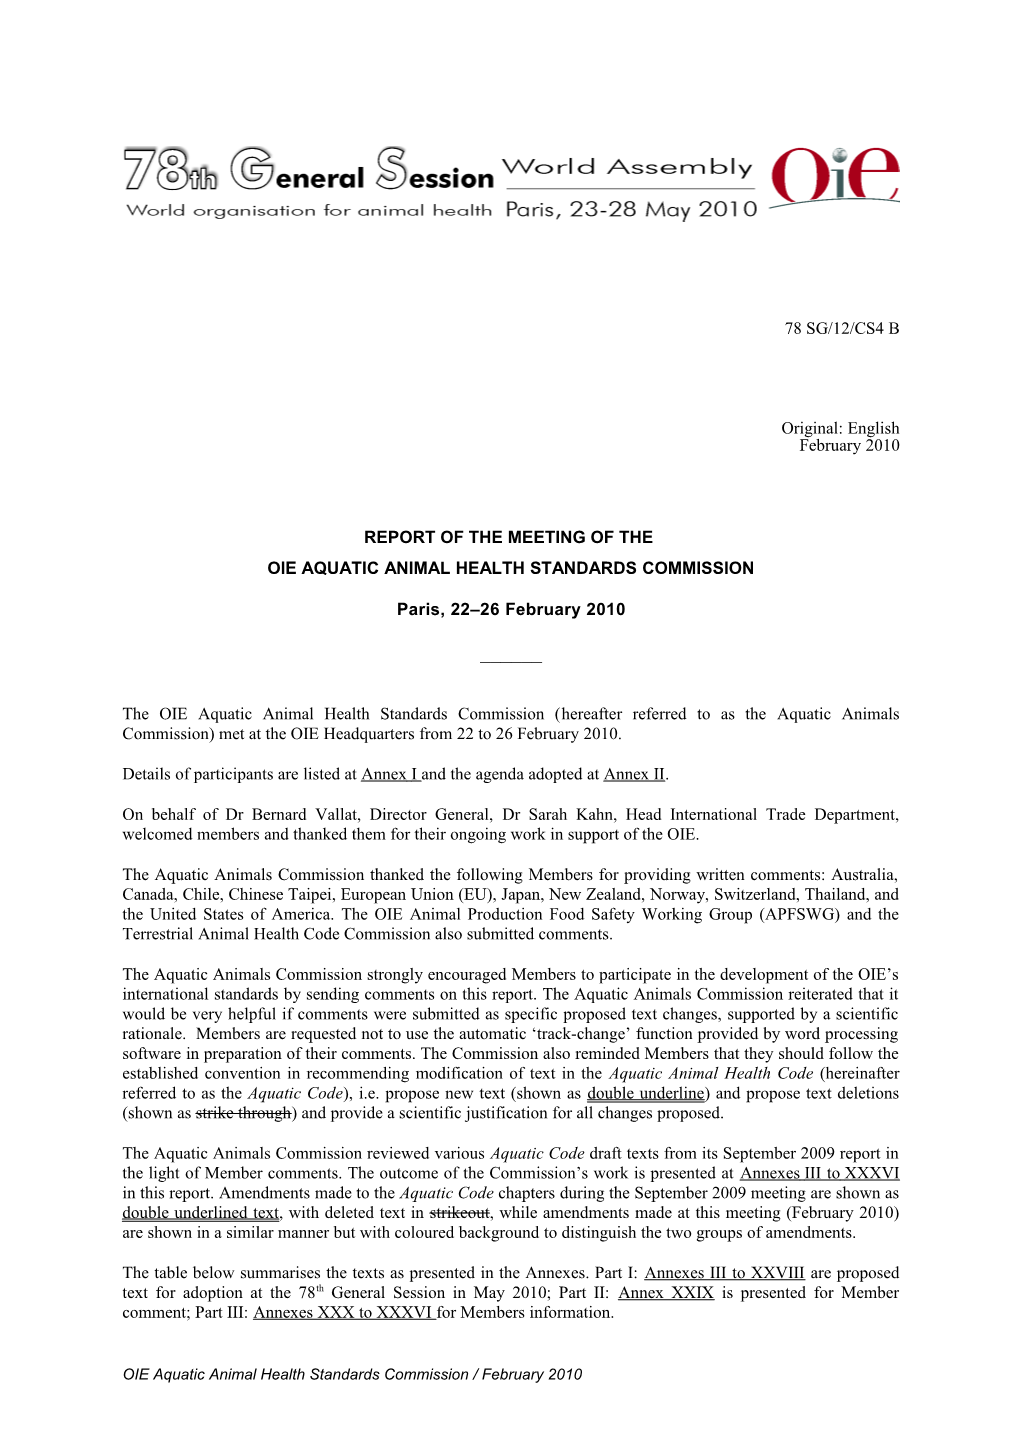 Report of the Meeting of the Oie Aquatic Animal Health Standards Commission